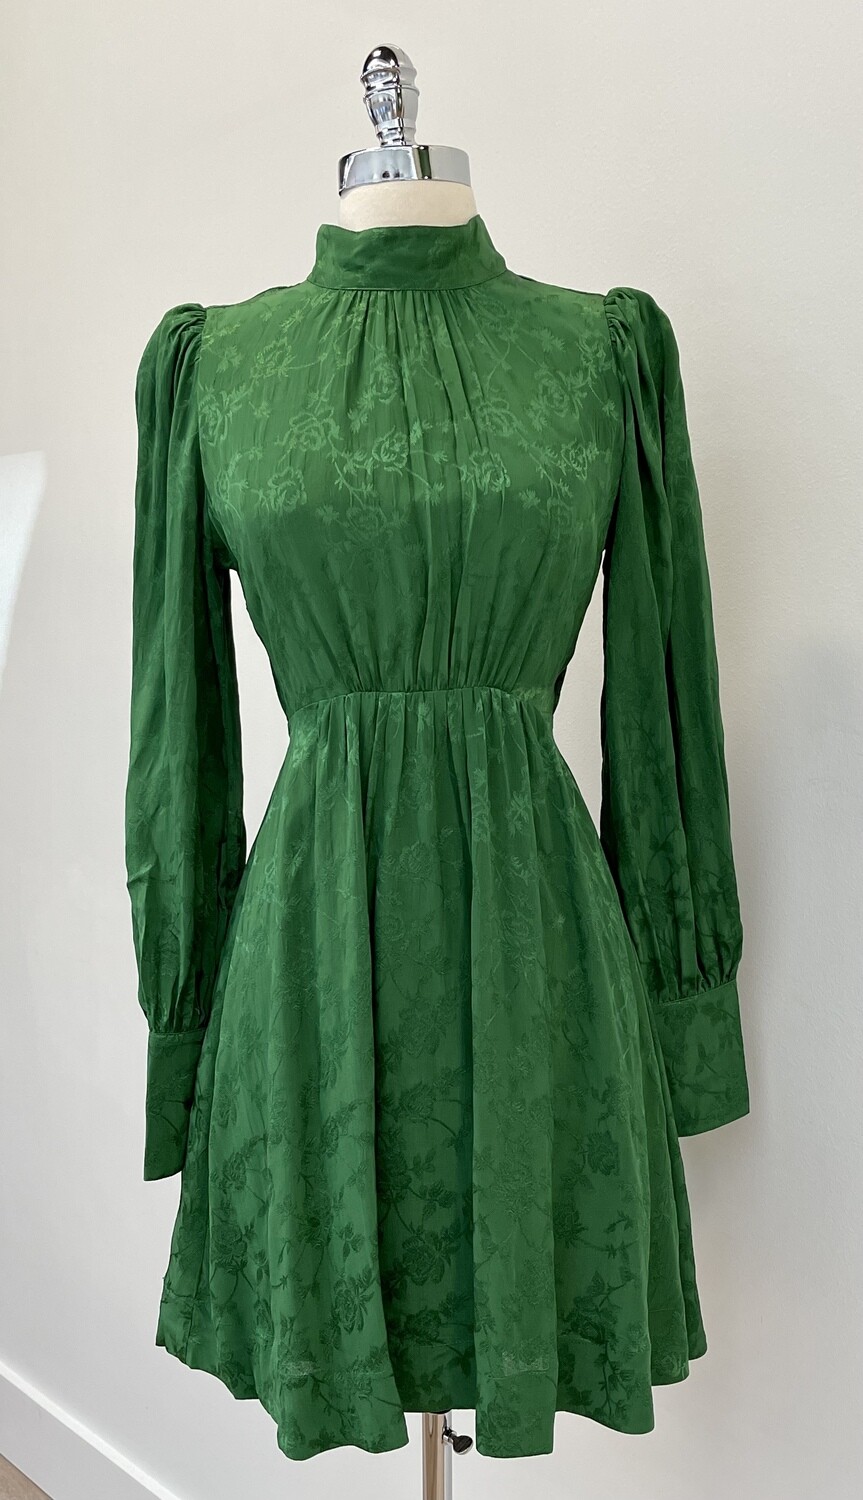 ByTiMo Jacquard Open Back Dress in Emerald